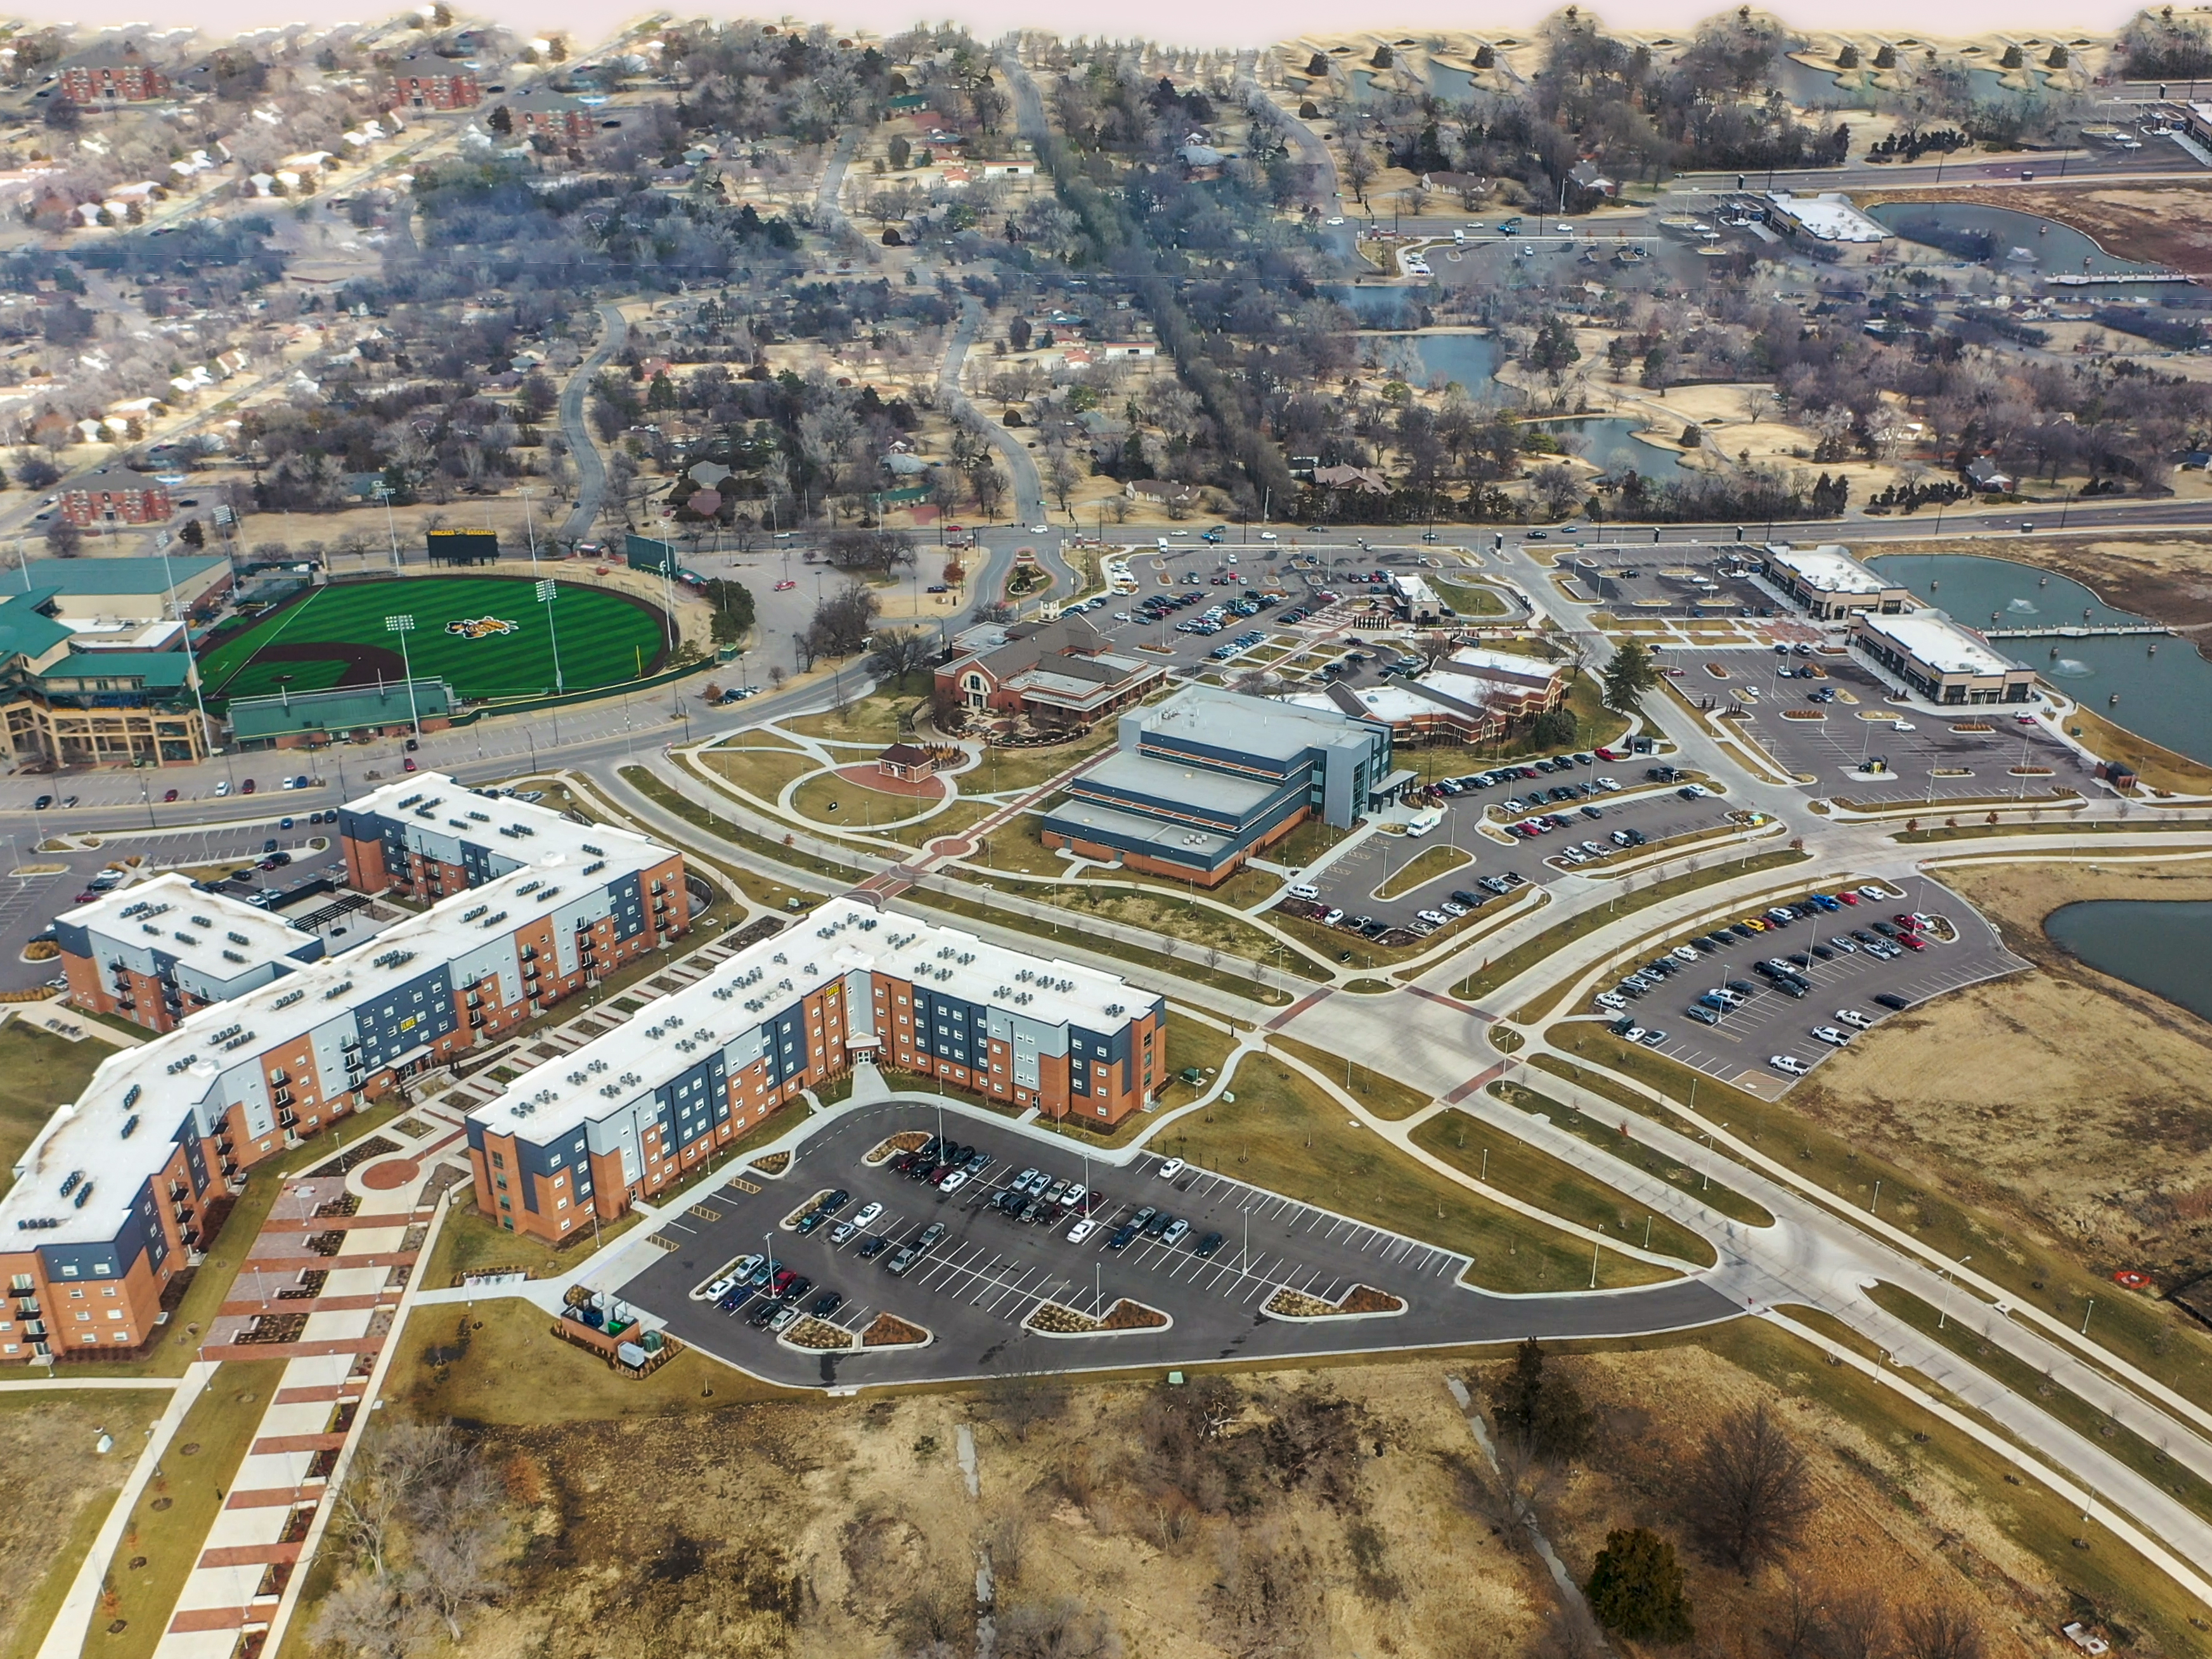 Aerial view of the Innovation Campus, including The Flats and Suites, Law Enforcement Training Center and Braeburn Square